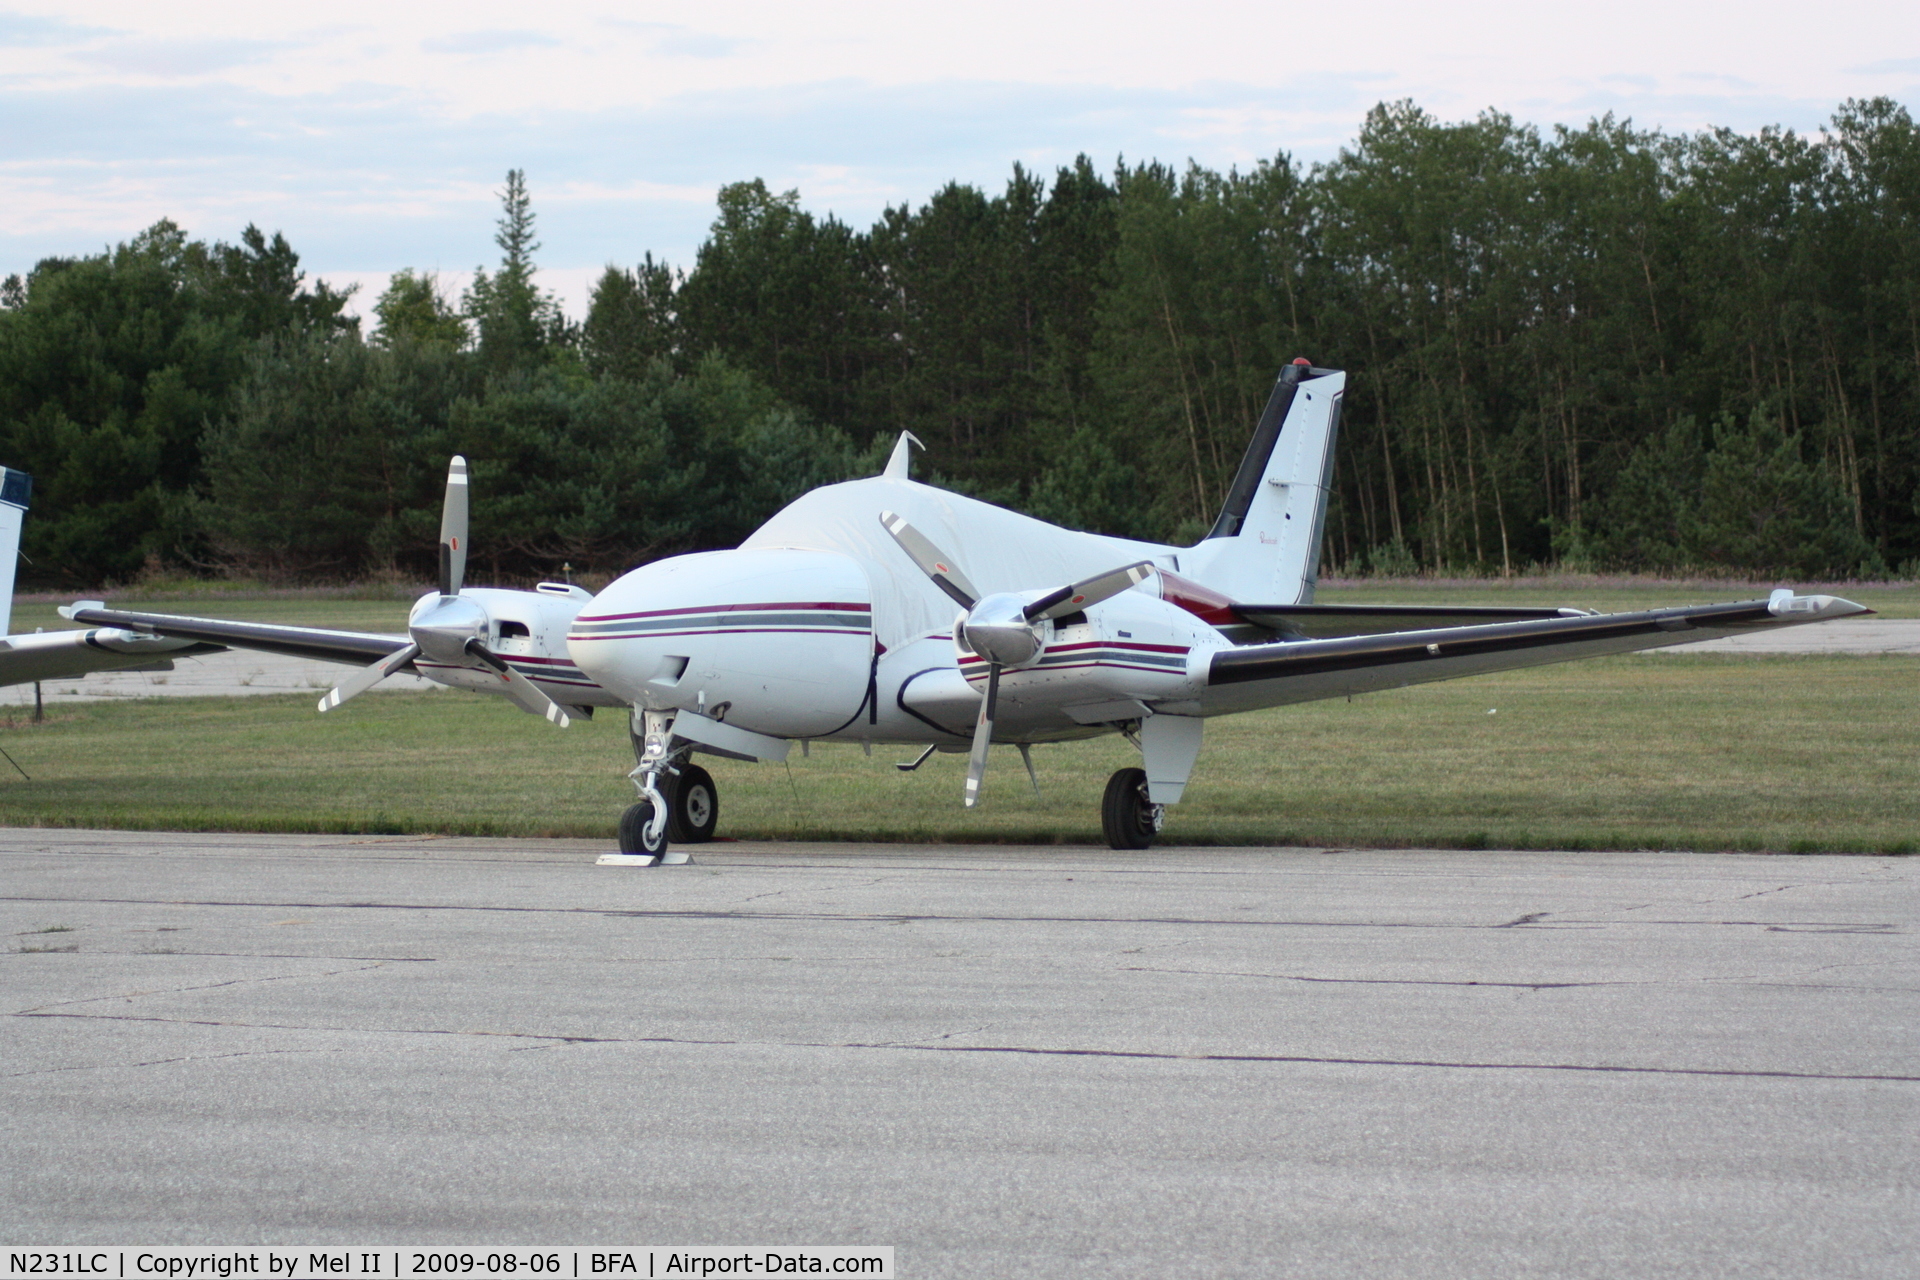 N231LC, 1975 Beech 58 Baron C/N TH-696, Parked